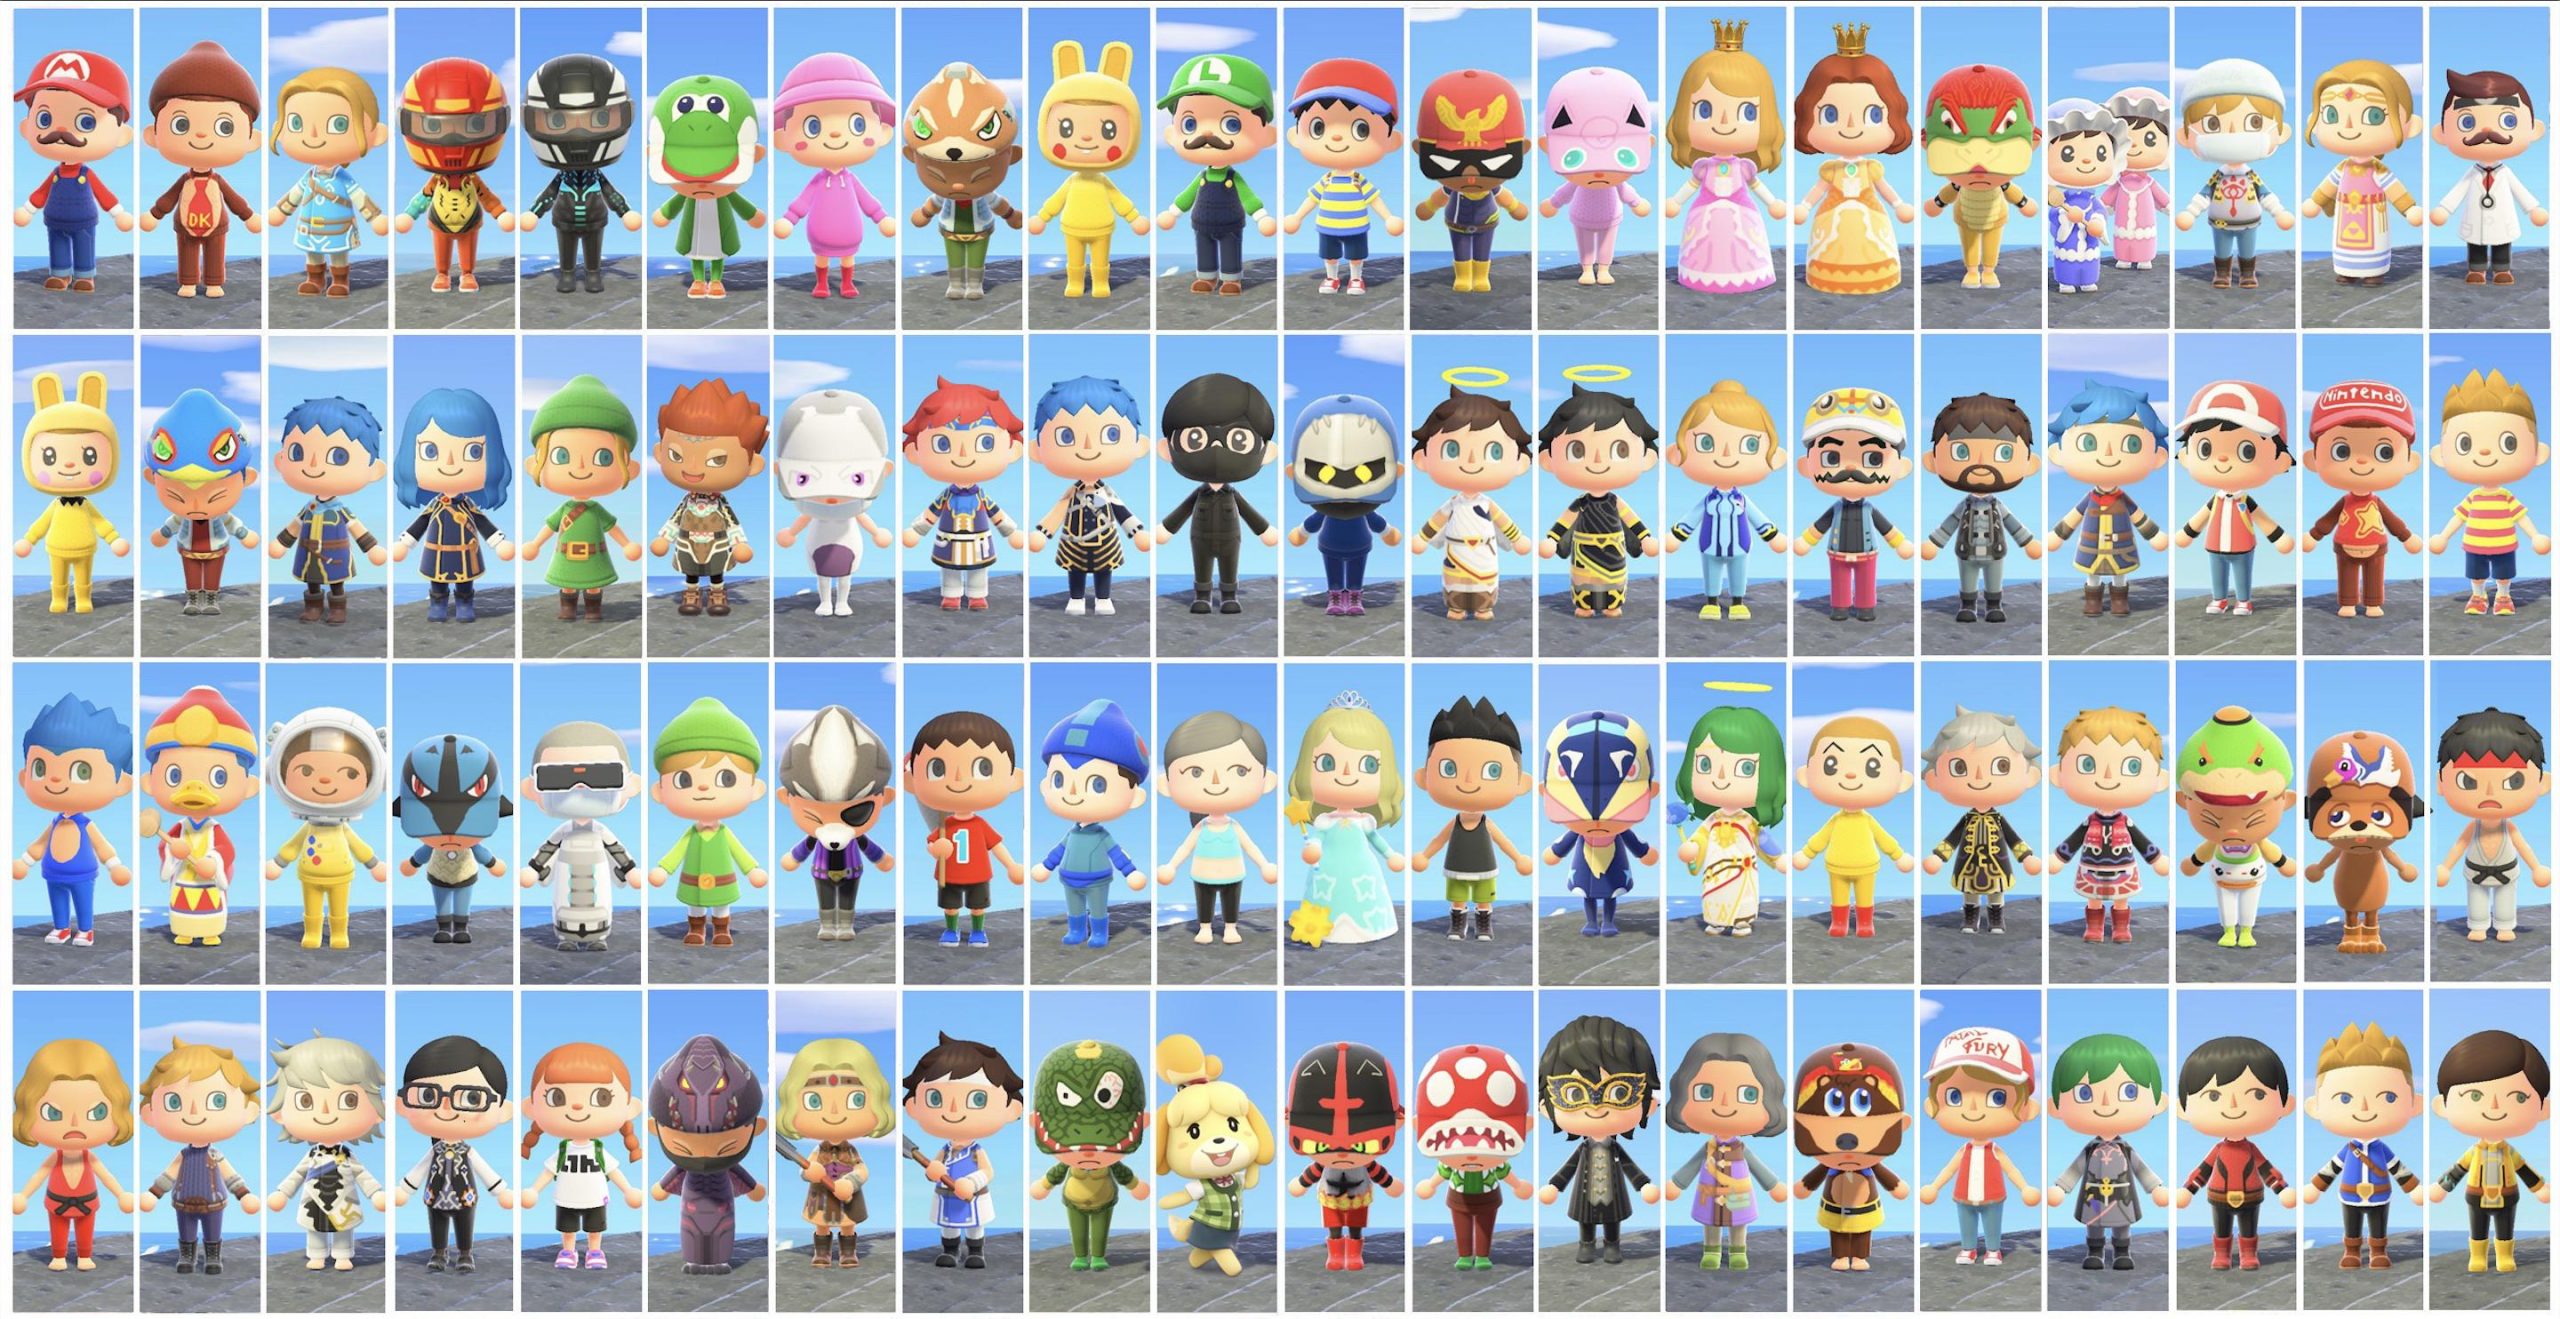 Fan Creates Costumes for the Entire Super Smash Bros. Ultimate Roster in Animal Crossing: New Horizons